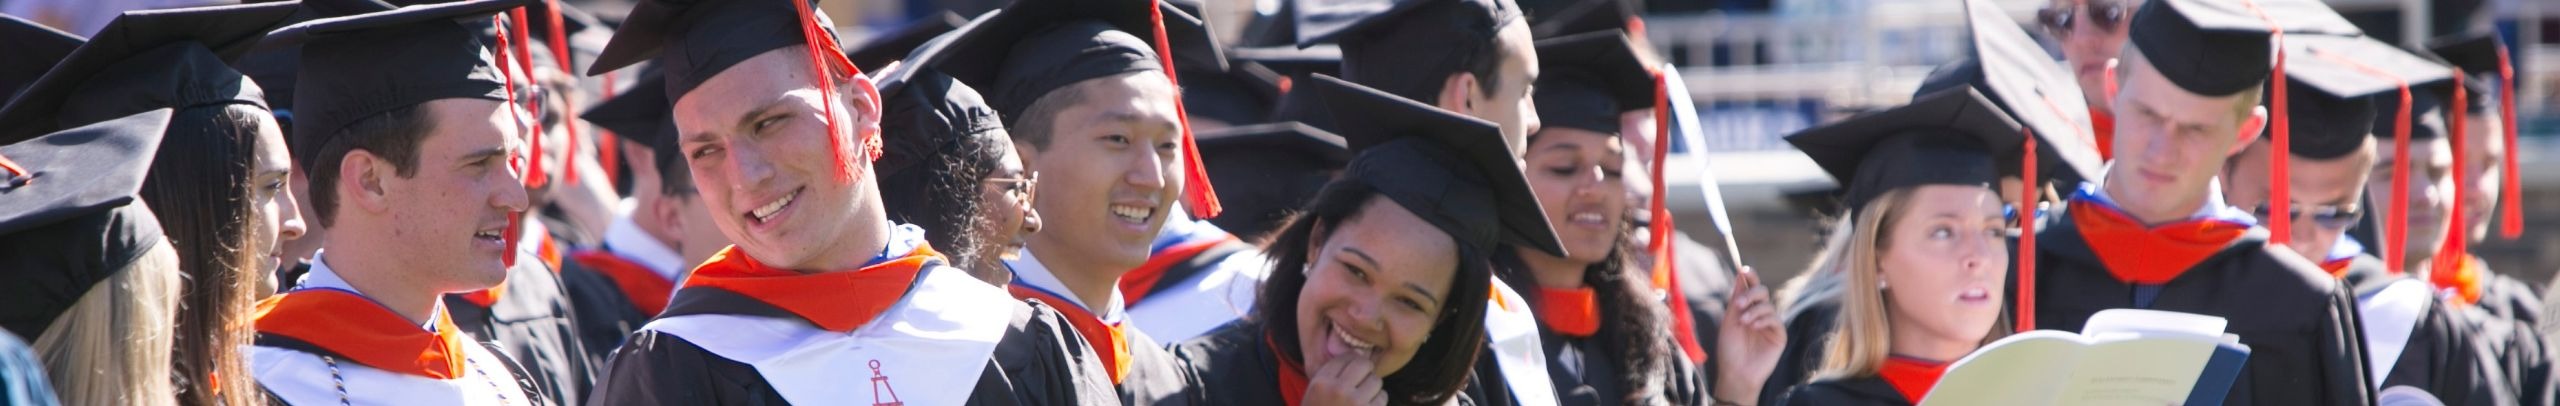 students in regalia at commencement